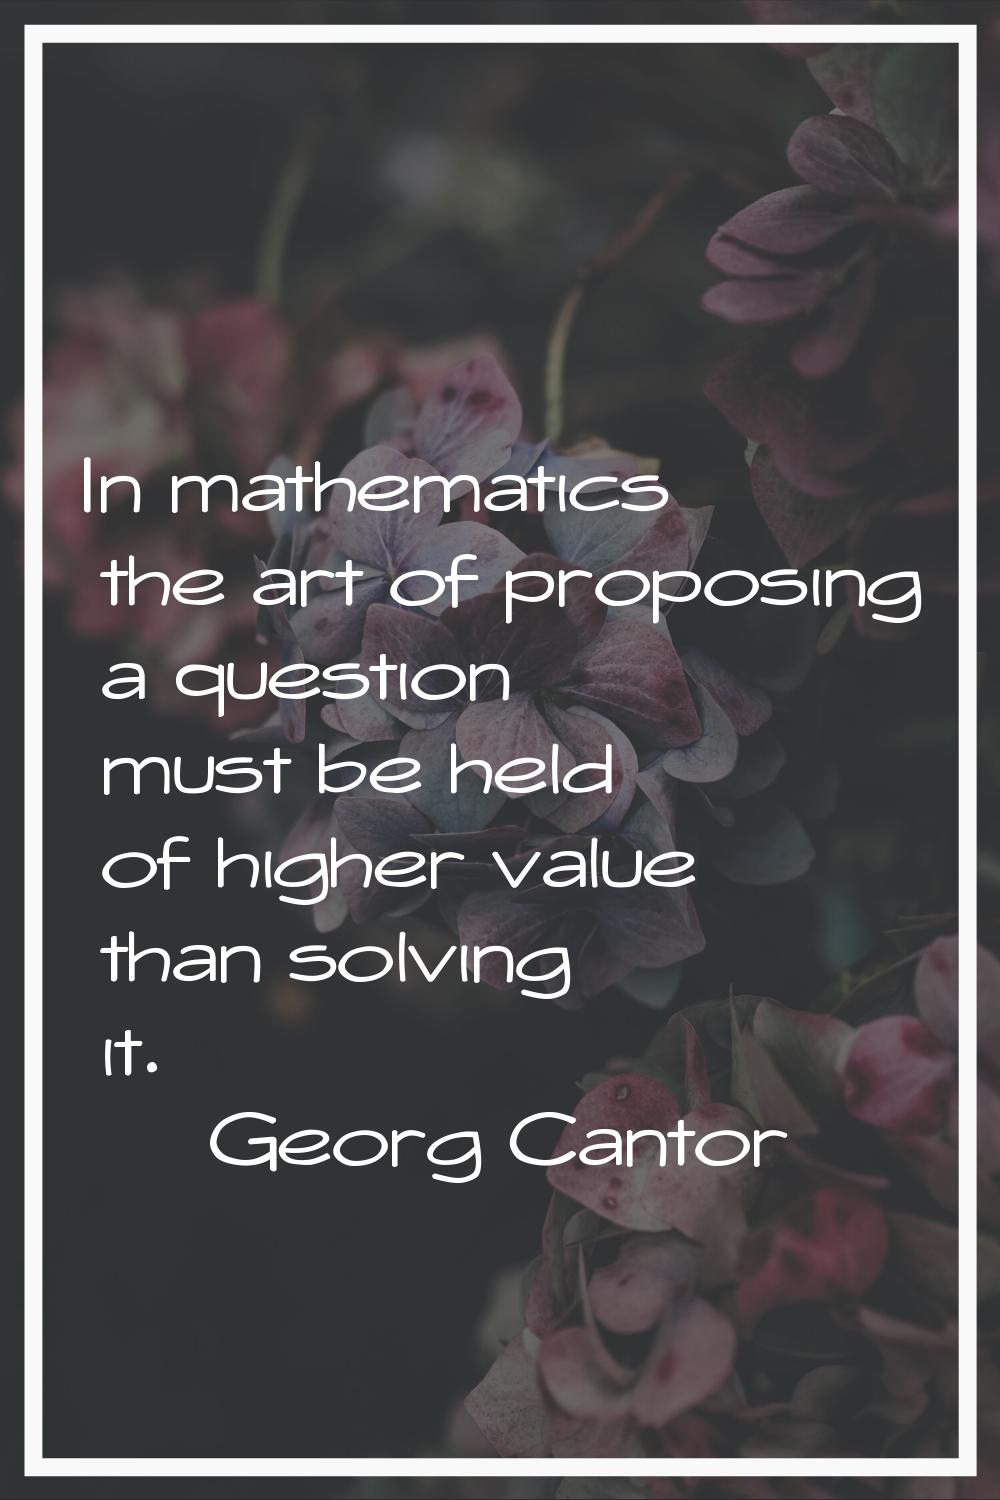 In mathematics the art of proposing a question must be held of higher value than solving it.